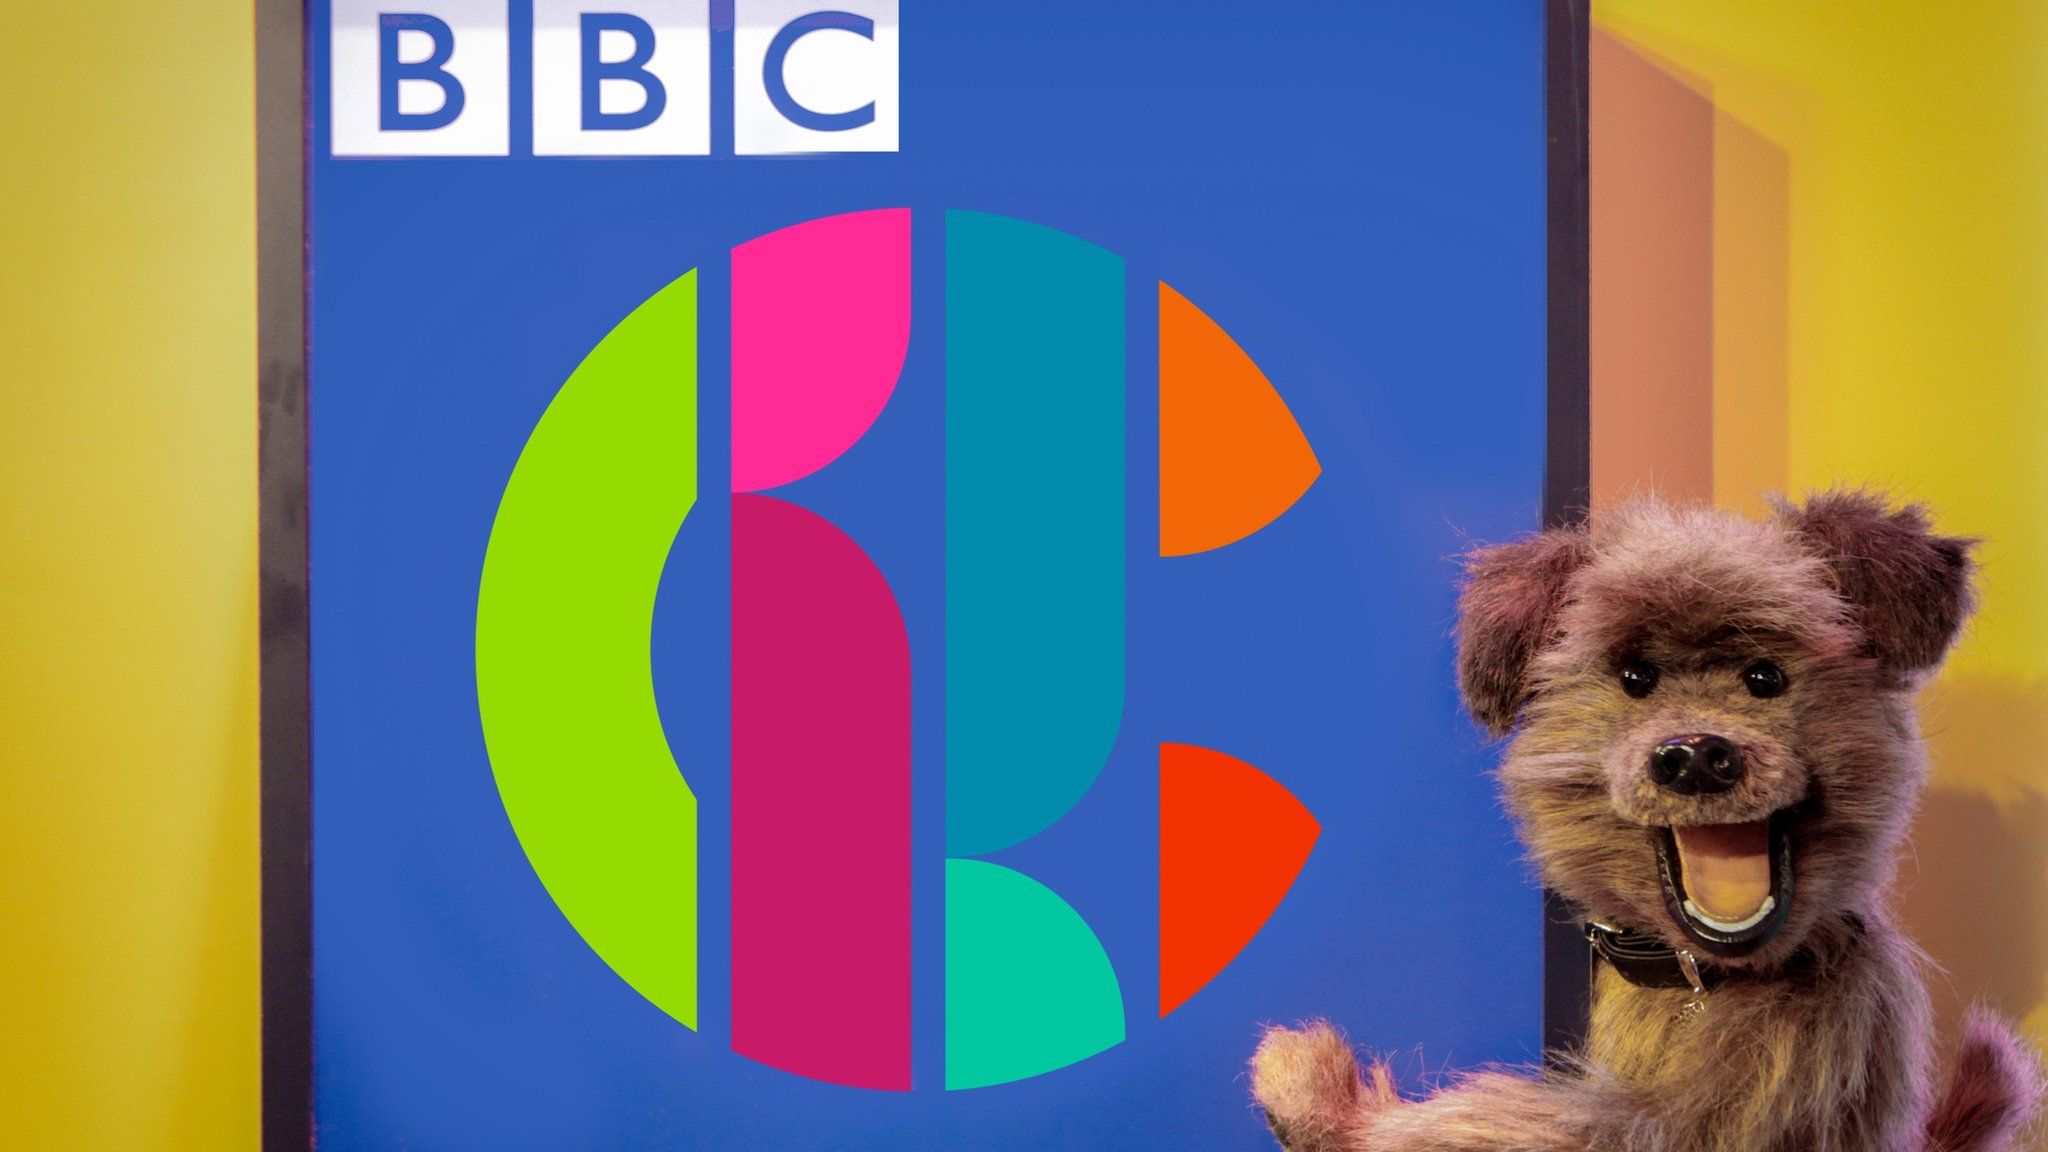 The Hacker T Dog puppet and the CBBC logo